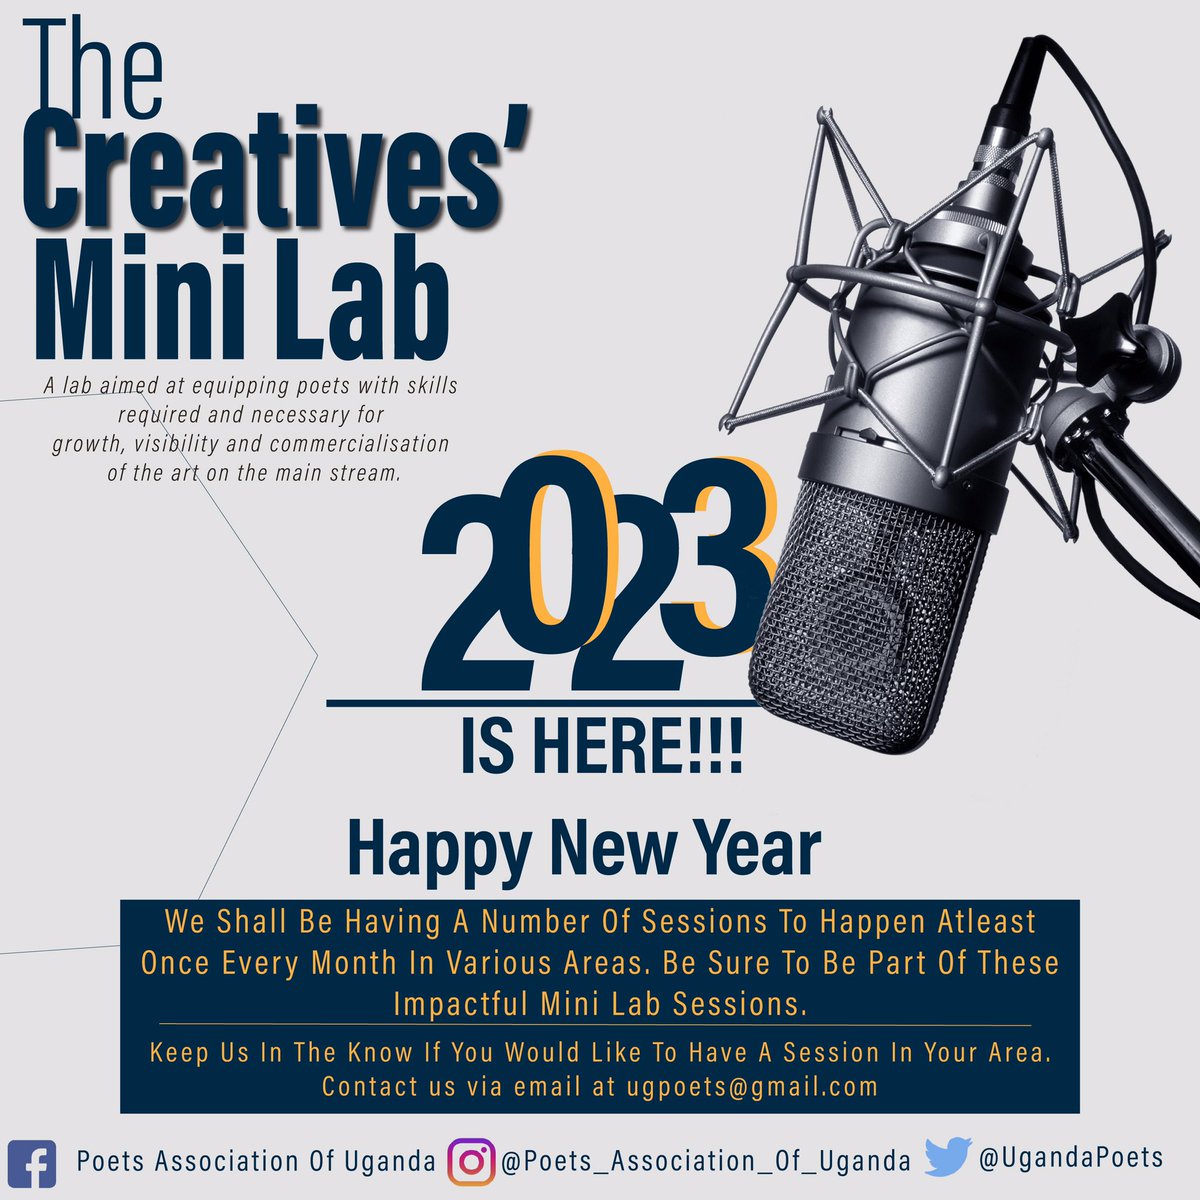 #TheCML is back!!! 

We continue to embark on the journey of fruitful conversations with creative minds as we learn, re-learn and unlearn perceptions to push us forward in the art of poetry. 

We can confidently say it will be a happy new year!